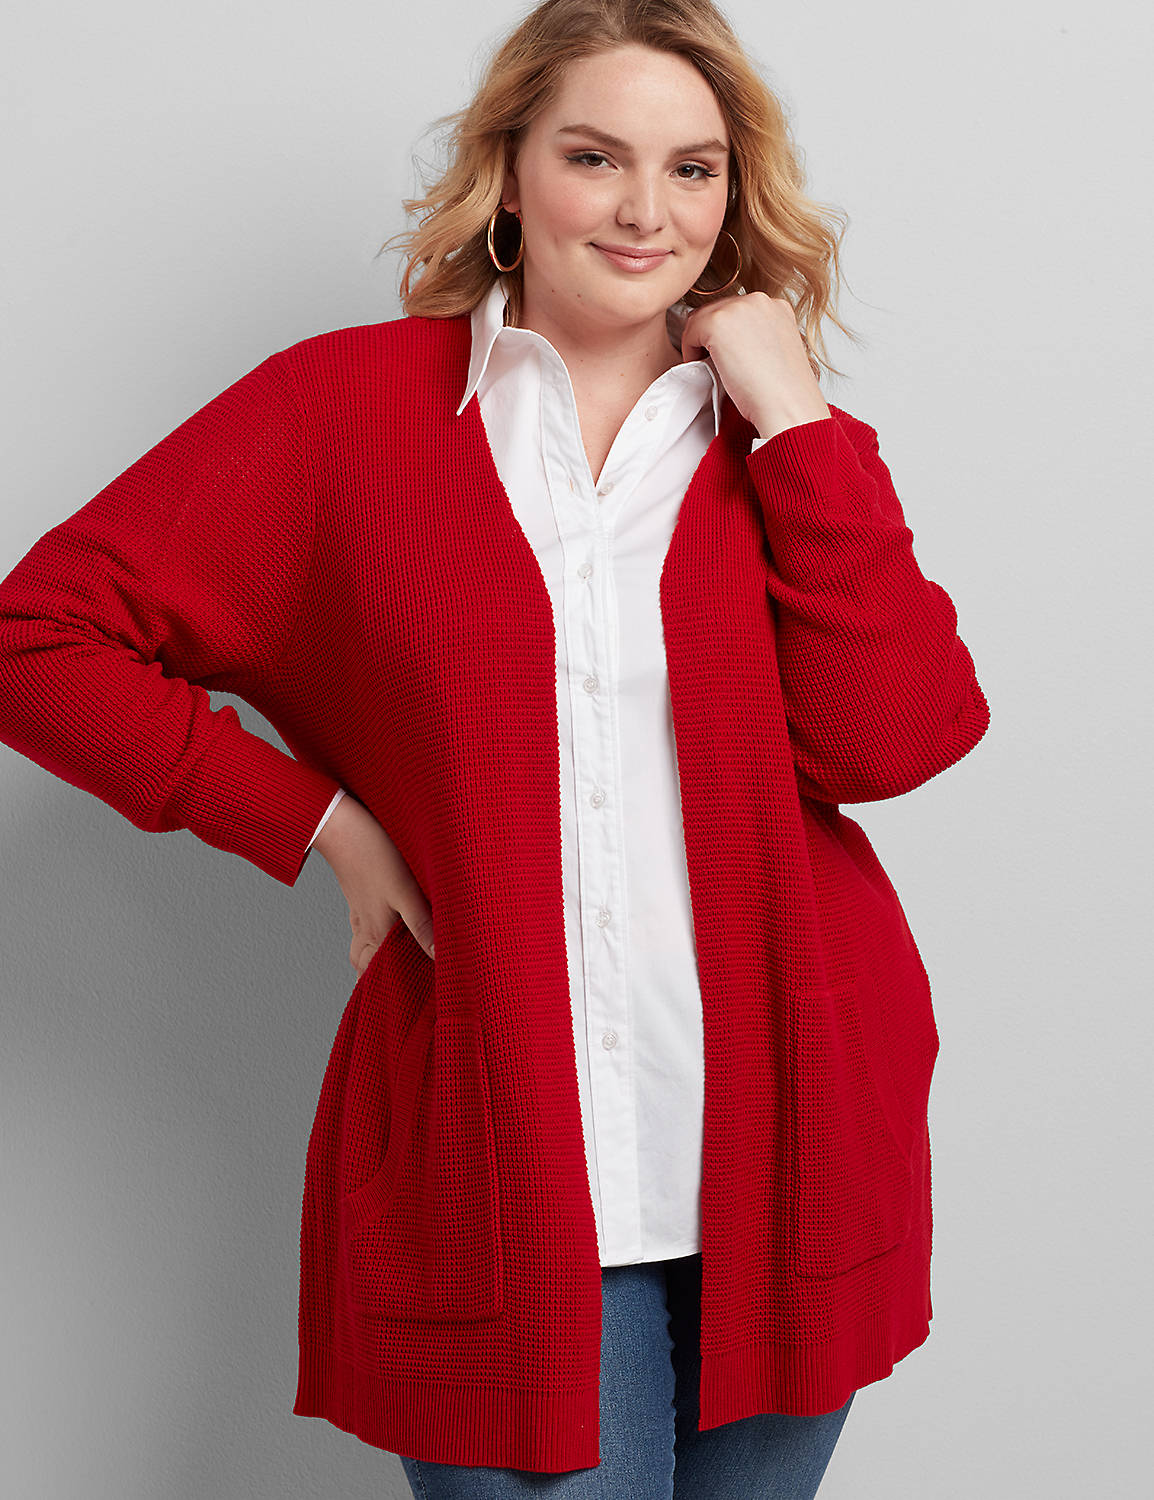 LONG SLEEVE OPEN FRONT PATCH POCKET WAFFLE STITCH CARDIGAN 1113637:PANTONE Haute Red:10/12 Product Image 1